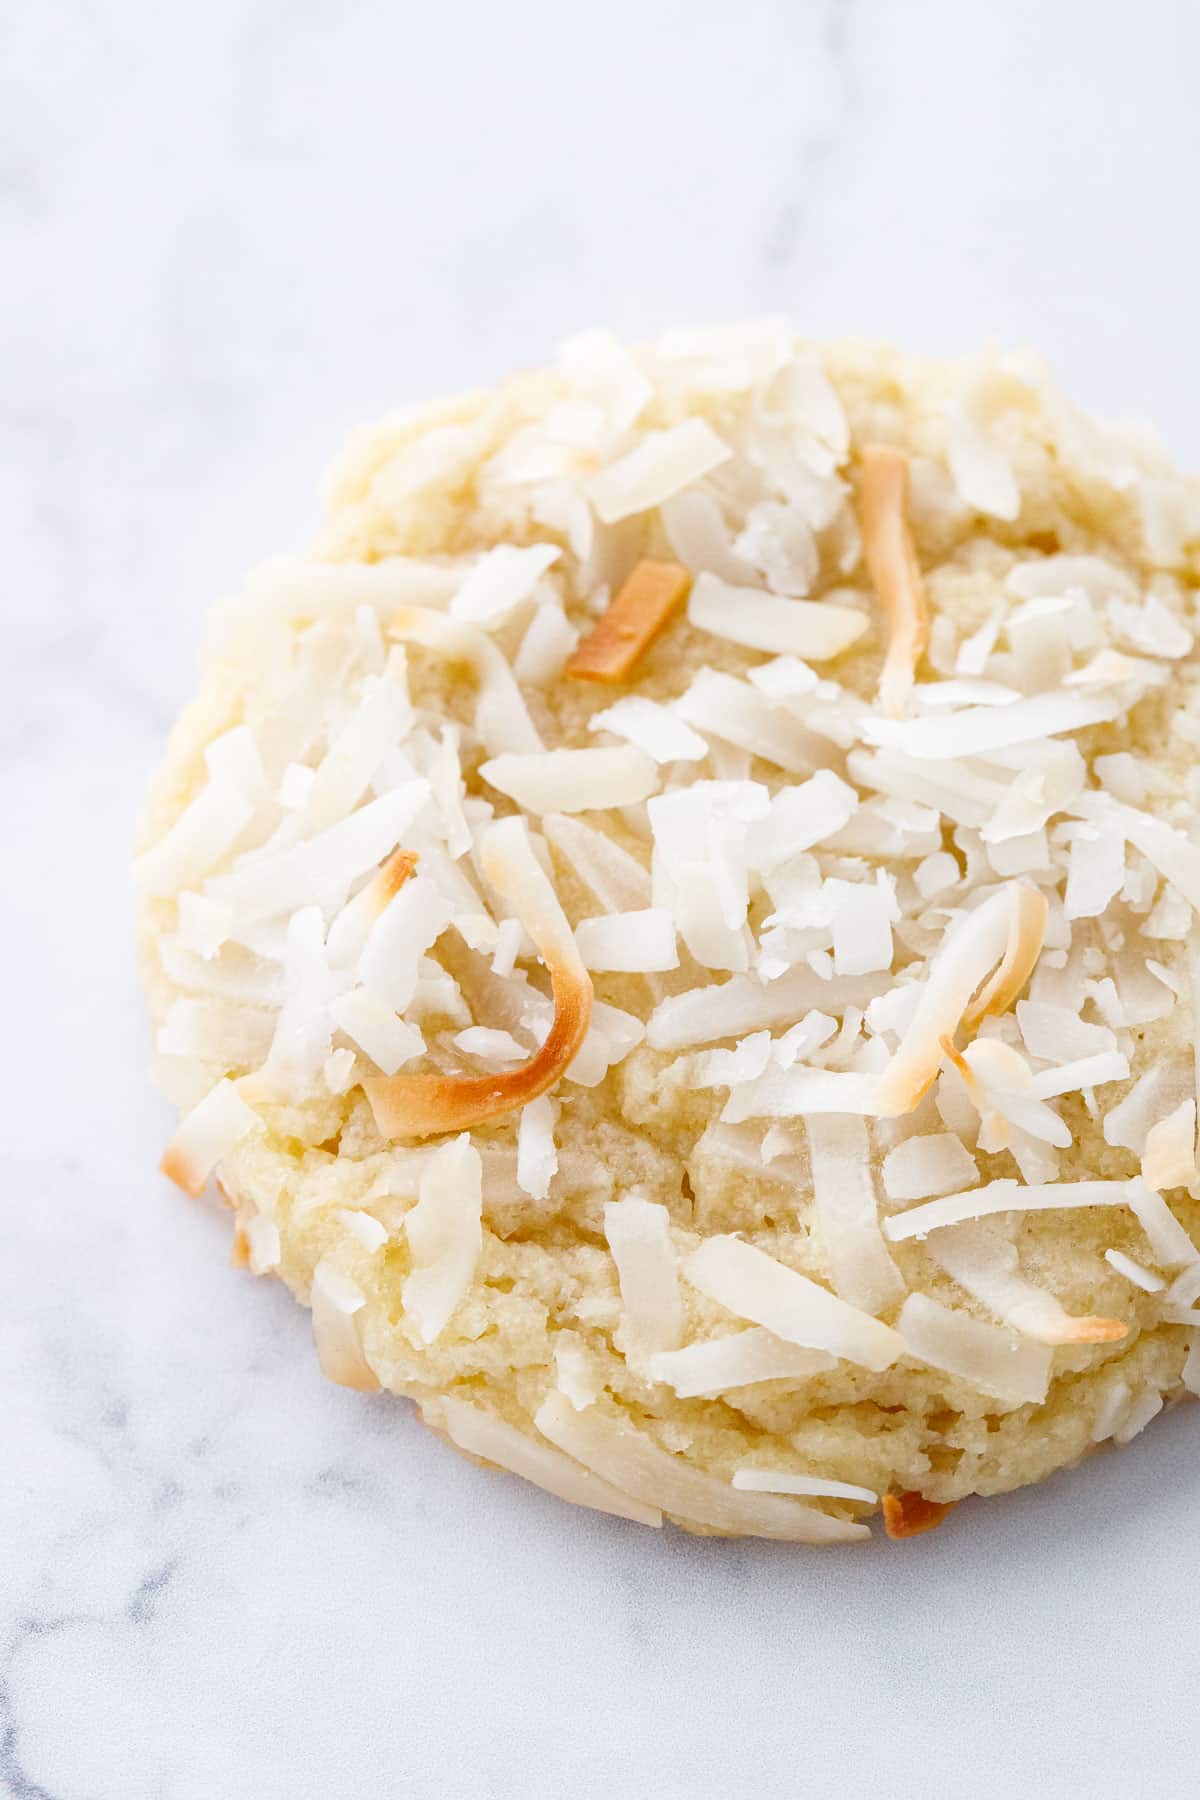 Closeup of the top of a Toasted Coconut Sugar Cookies, with visible shreds of coconut and a crinkly sugar cookie texture underneath.